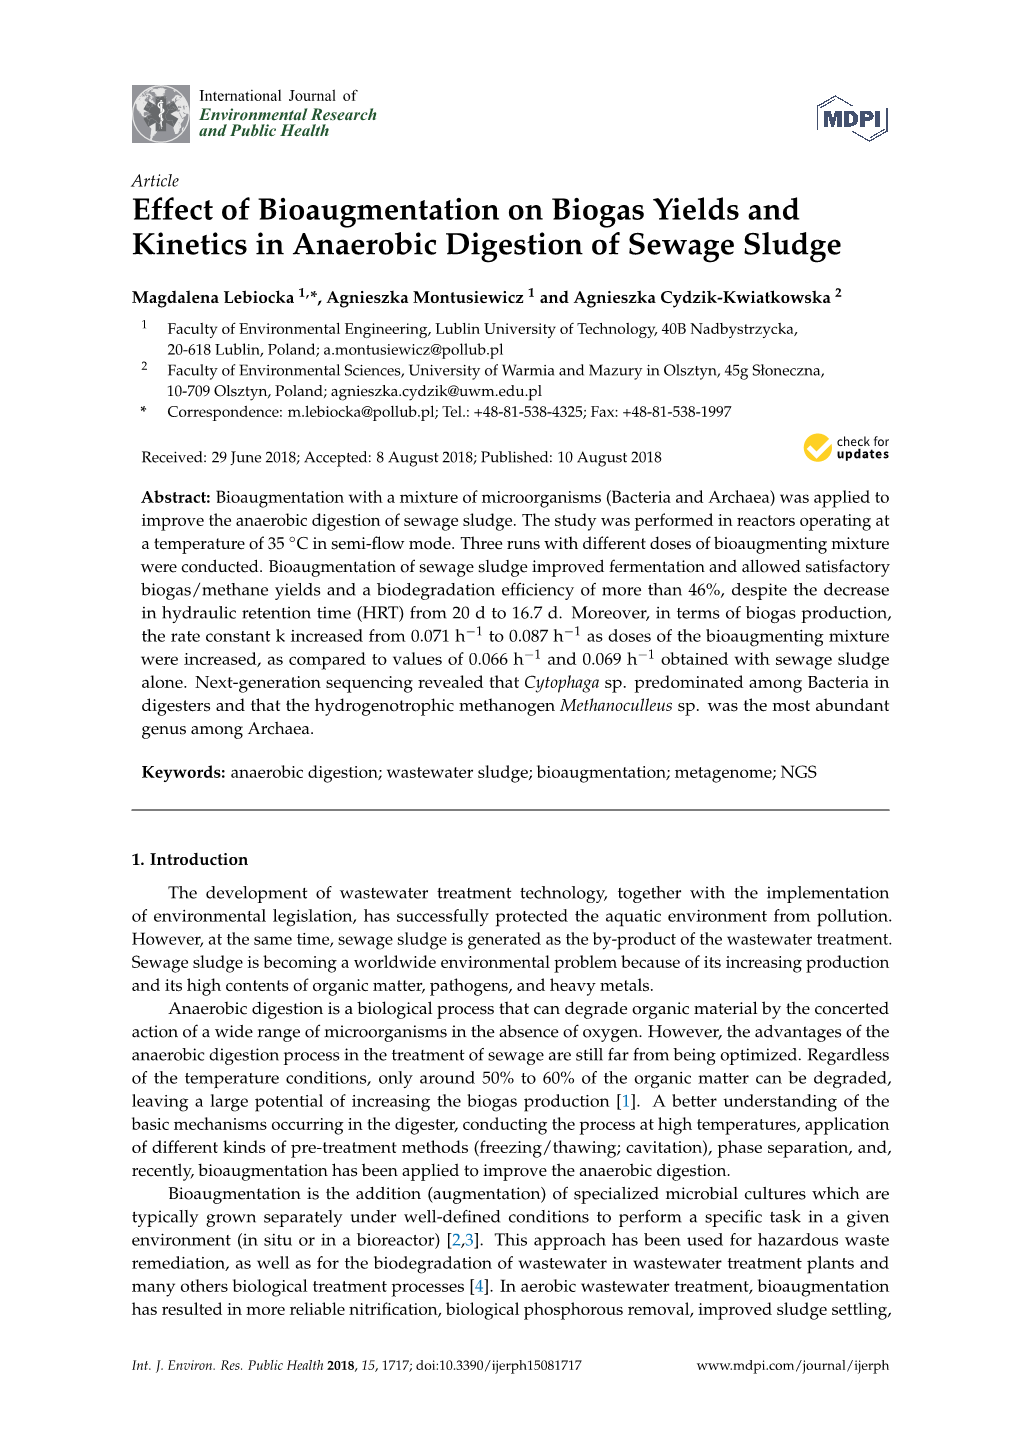 Effect of Bioaugmentation on Biogas Yields and Kinetics in Anaerobic Digestion of Sewage Sludge